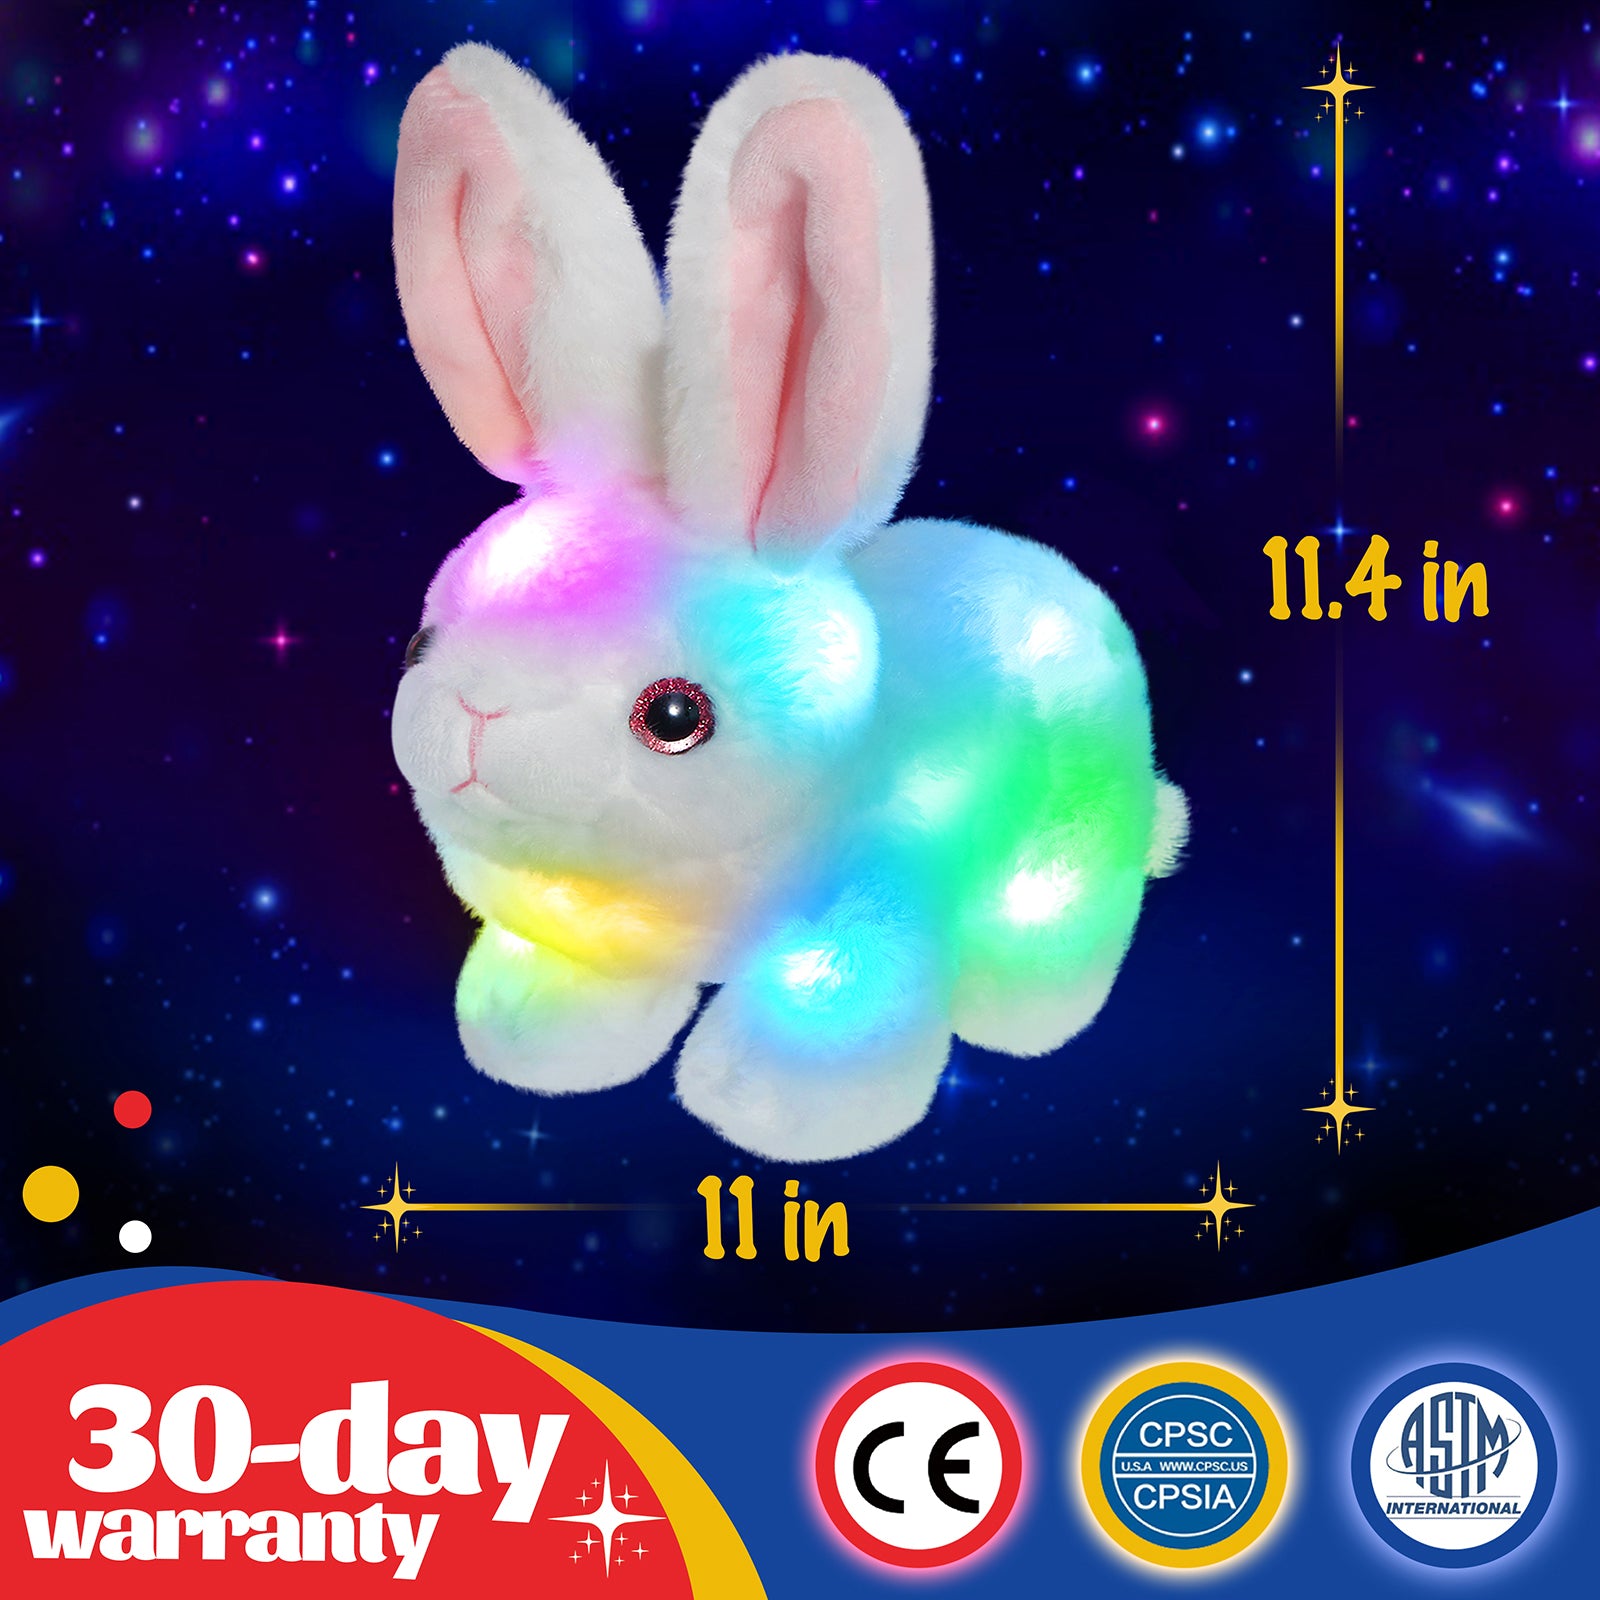 Glow Guards Light up Musical Stuffed Rabbit Soft Pillow Plush with LED Night Lights Bedtime Pal Gifts for Toddler Kids, 11.4 inches